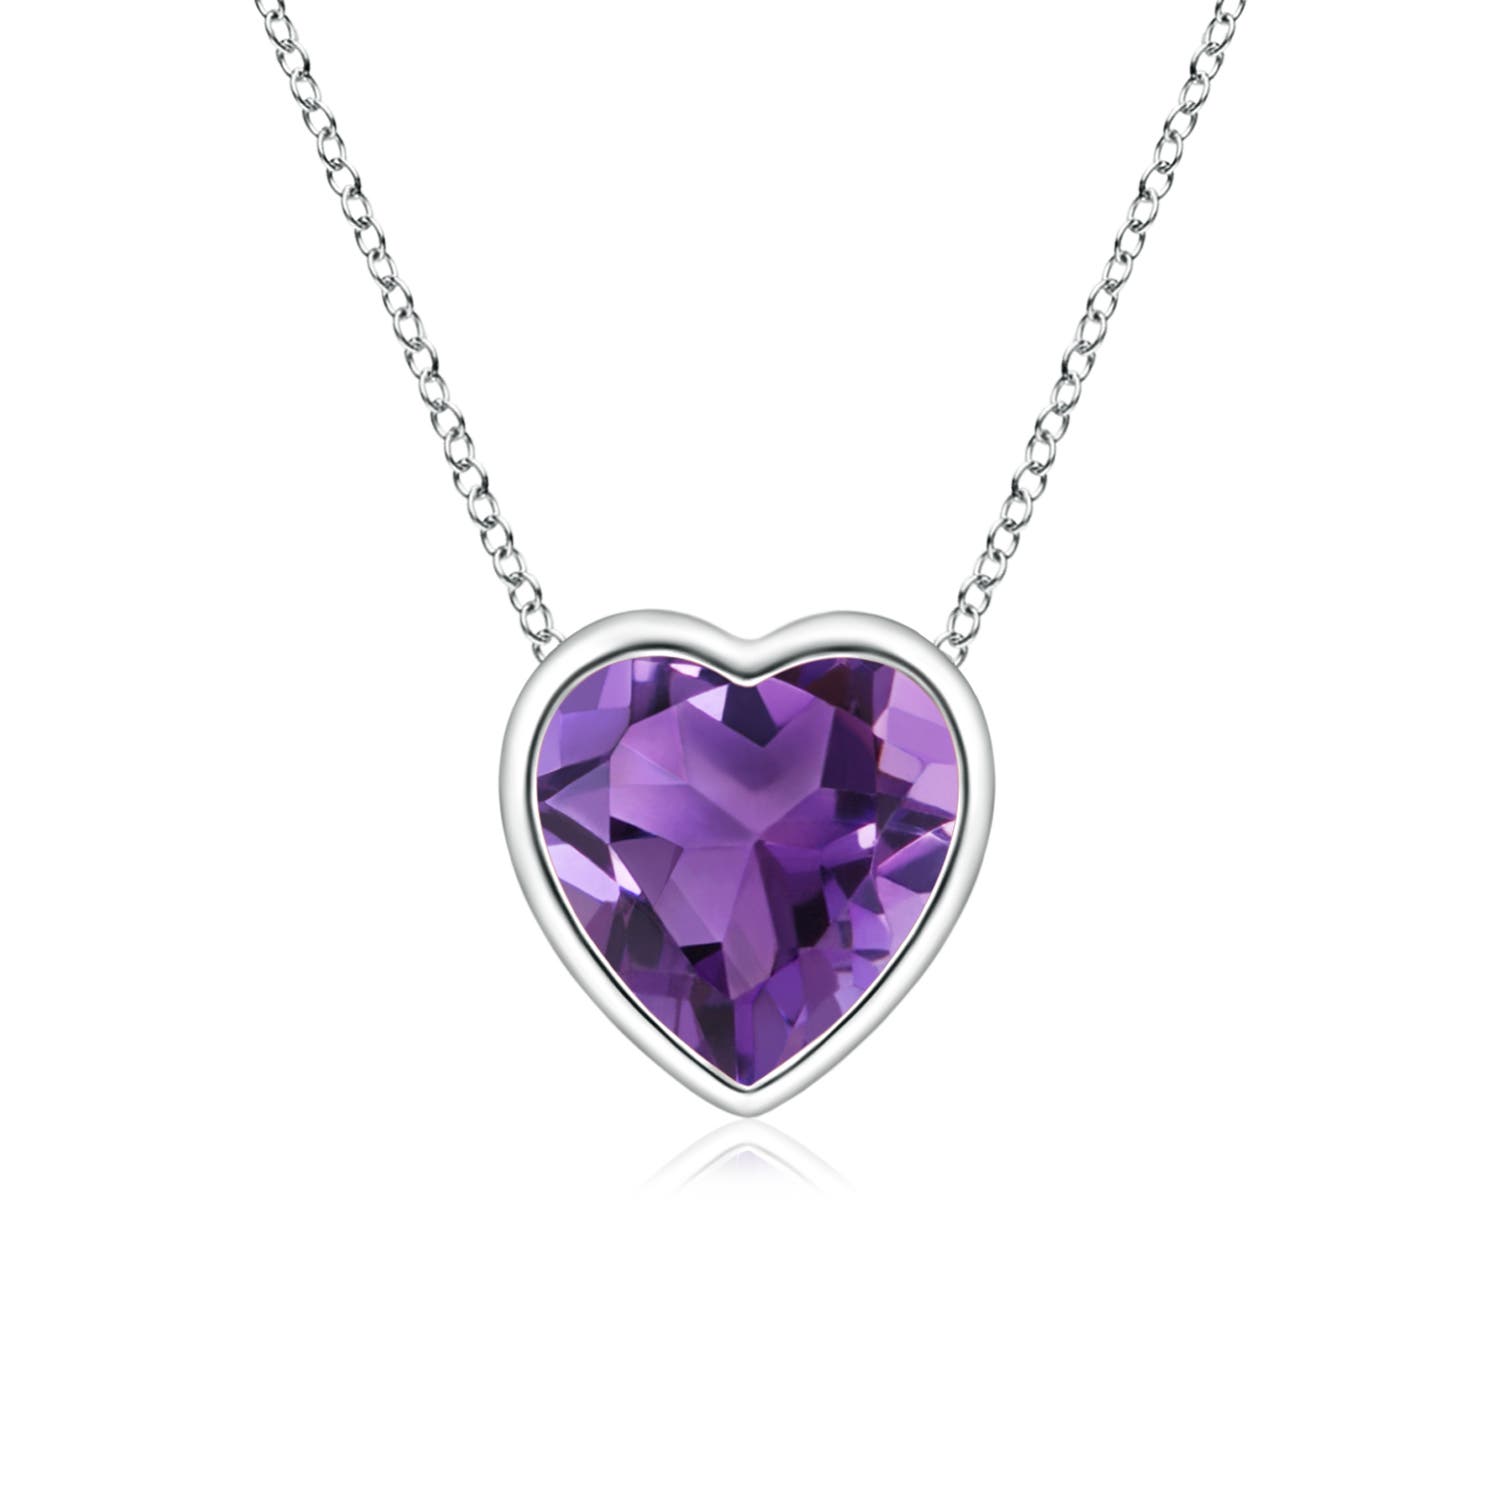 AAA - Amethyst / 0.35 CT / 14 KT White Gold